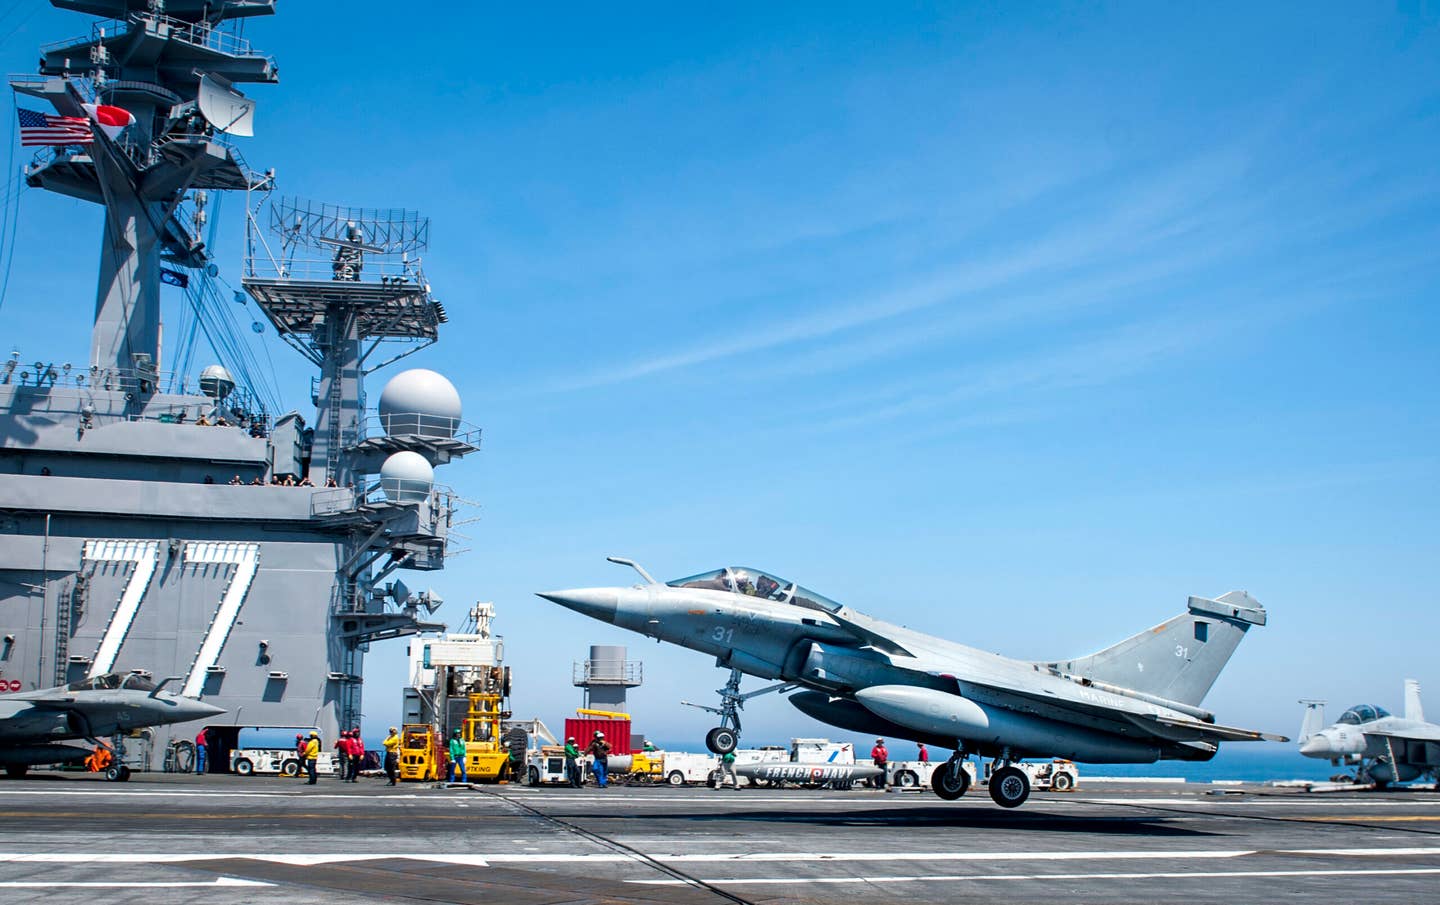 A Rafale M of the French navy lands during flight operations aboard the aircraft carrier USS <em>George H.W. Bush</em>. <em>Mass Communication Specialist 3rd Class Brooke Macchietto/U.S. Navy</em>